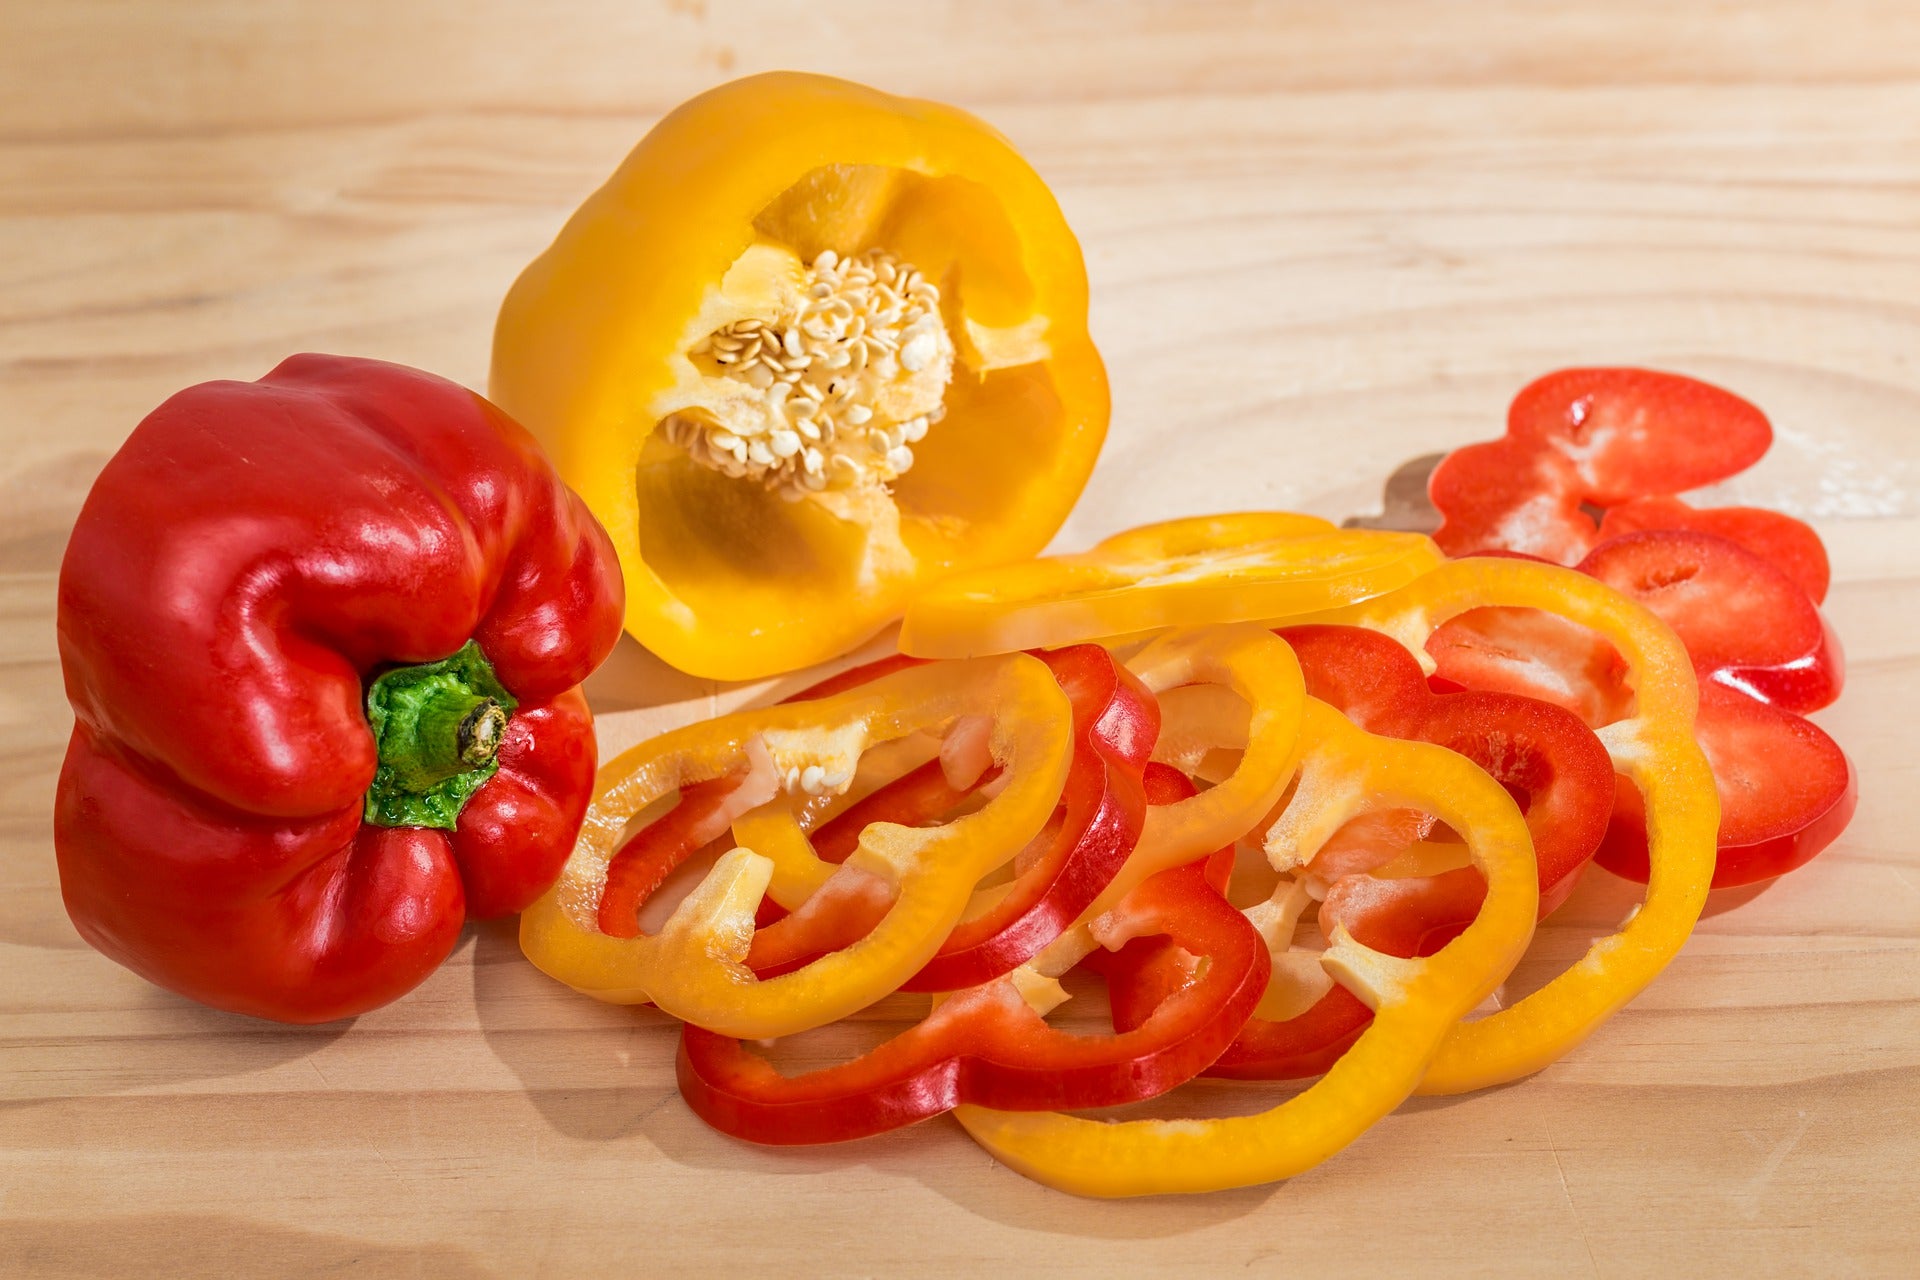 Sliced bell peppers that guinea pigs can eat